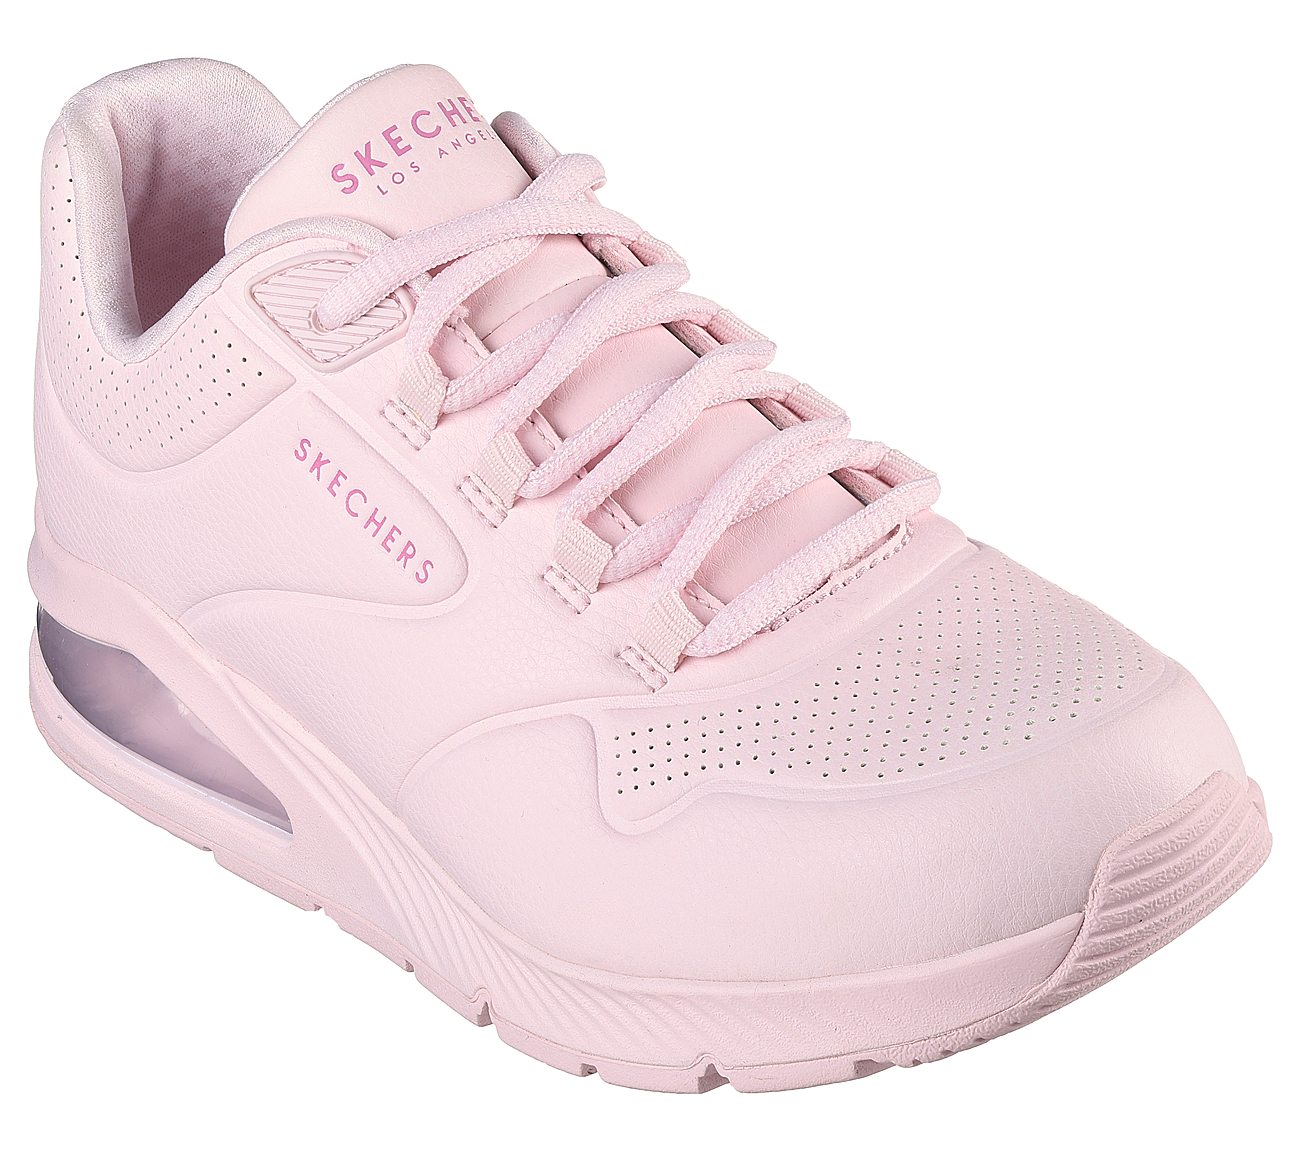 UNO 2 - PASTEL PLAYERS, LLLIGHT PINK Footwear Right View